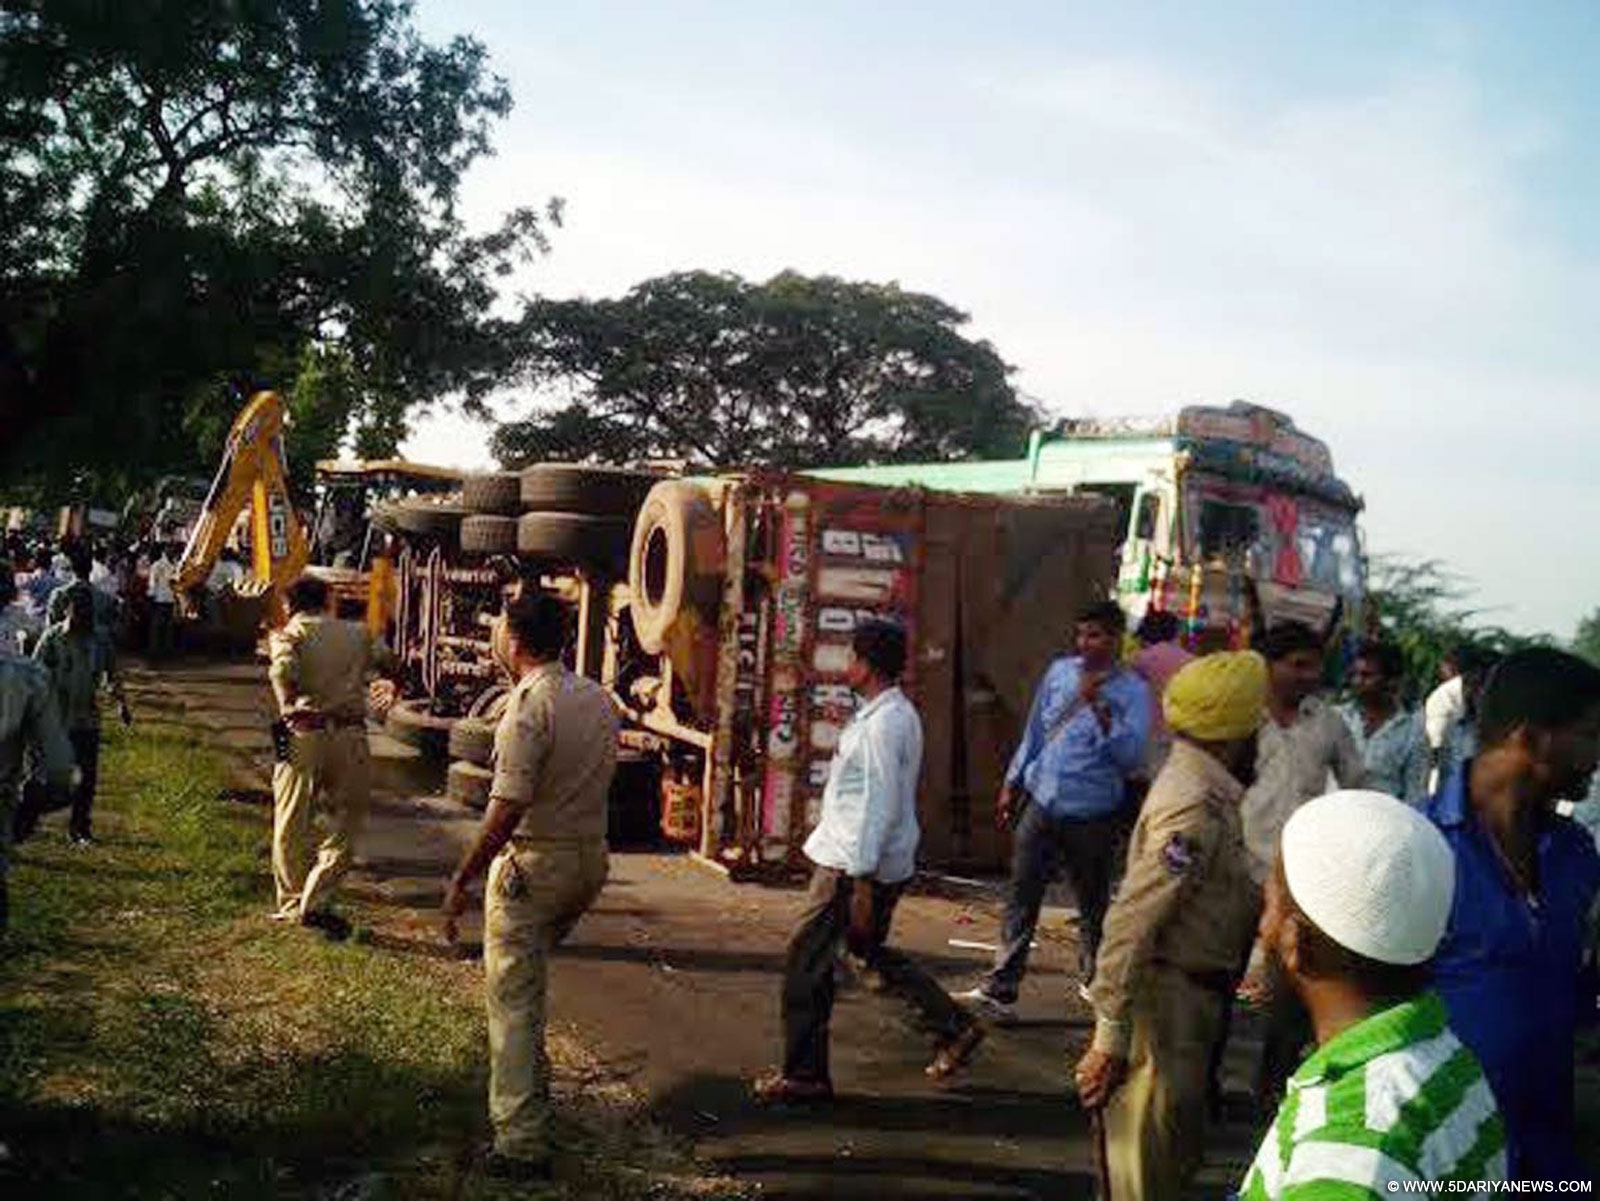 Mangled remains of the bus that collided with a truck in Telangana